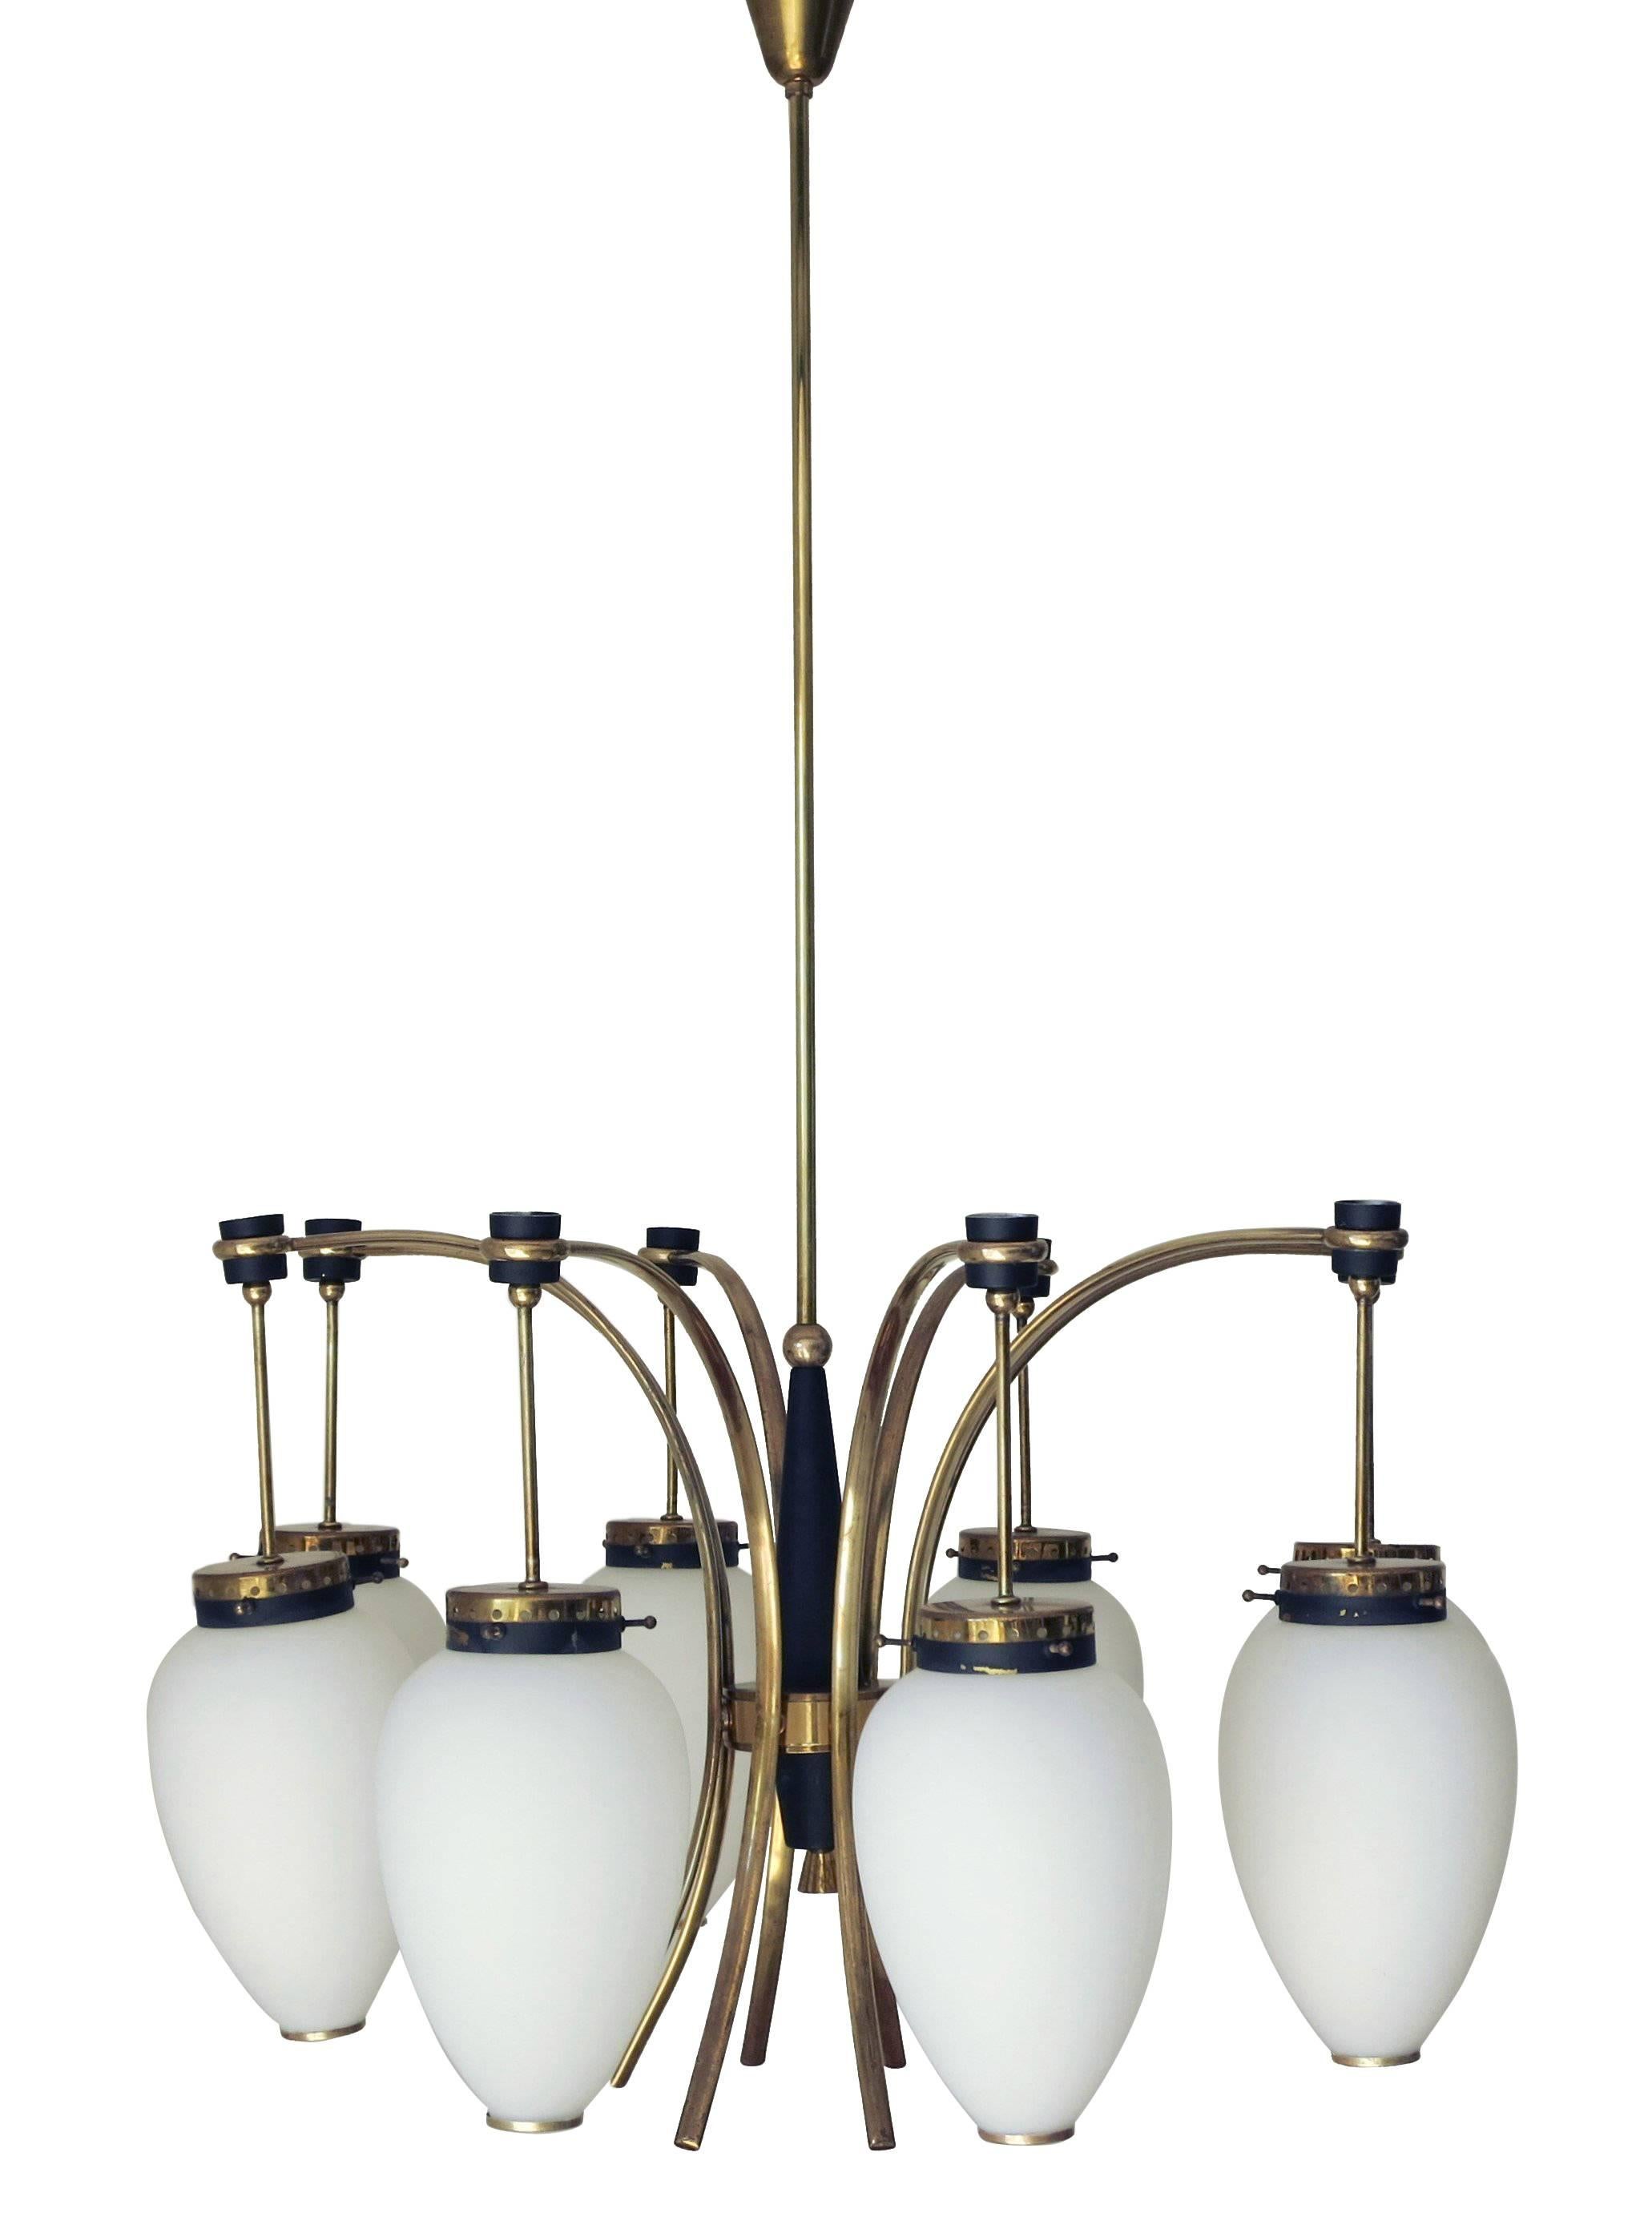 Original vintage chandelier with drop shaped matte white Murano glass shades, mounted on brass frame / Designed by Stilnovo circa 1950’s / Made in Italy 
8 lights / E12 type / max 40W each
Diameter: 27 inches / Height: 43.5 inches including rod and